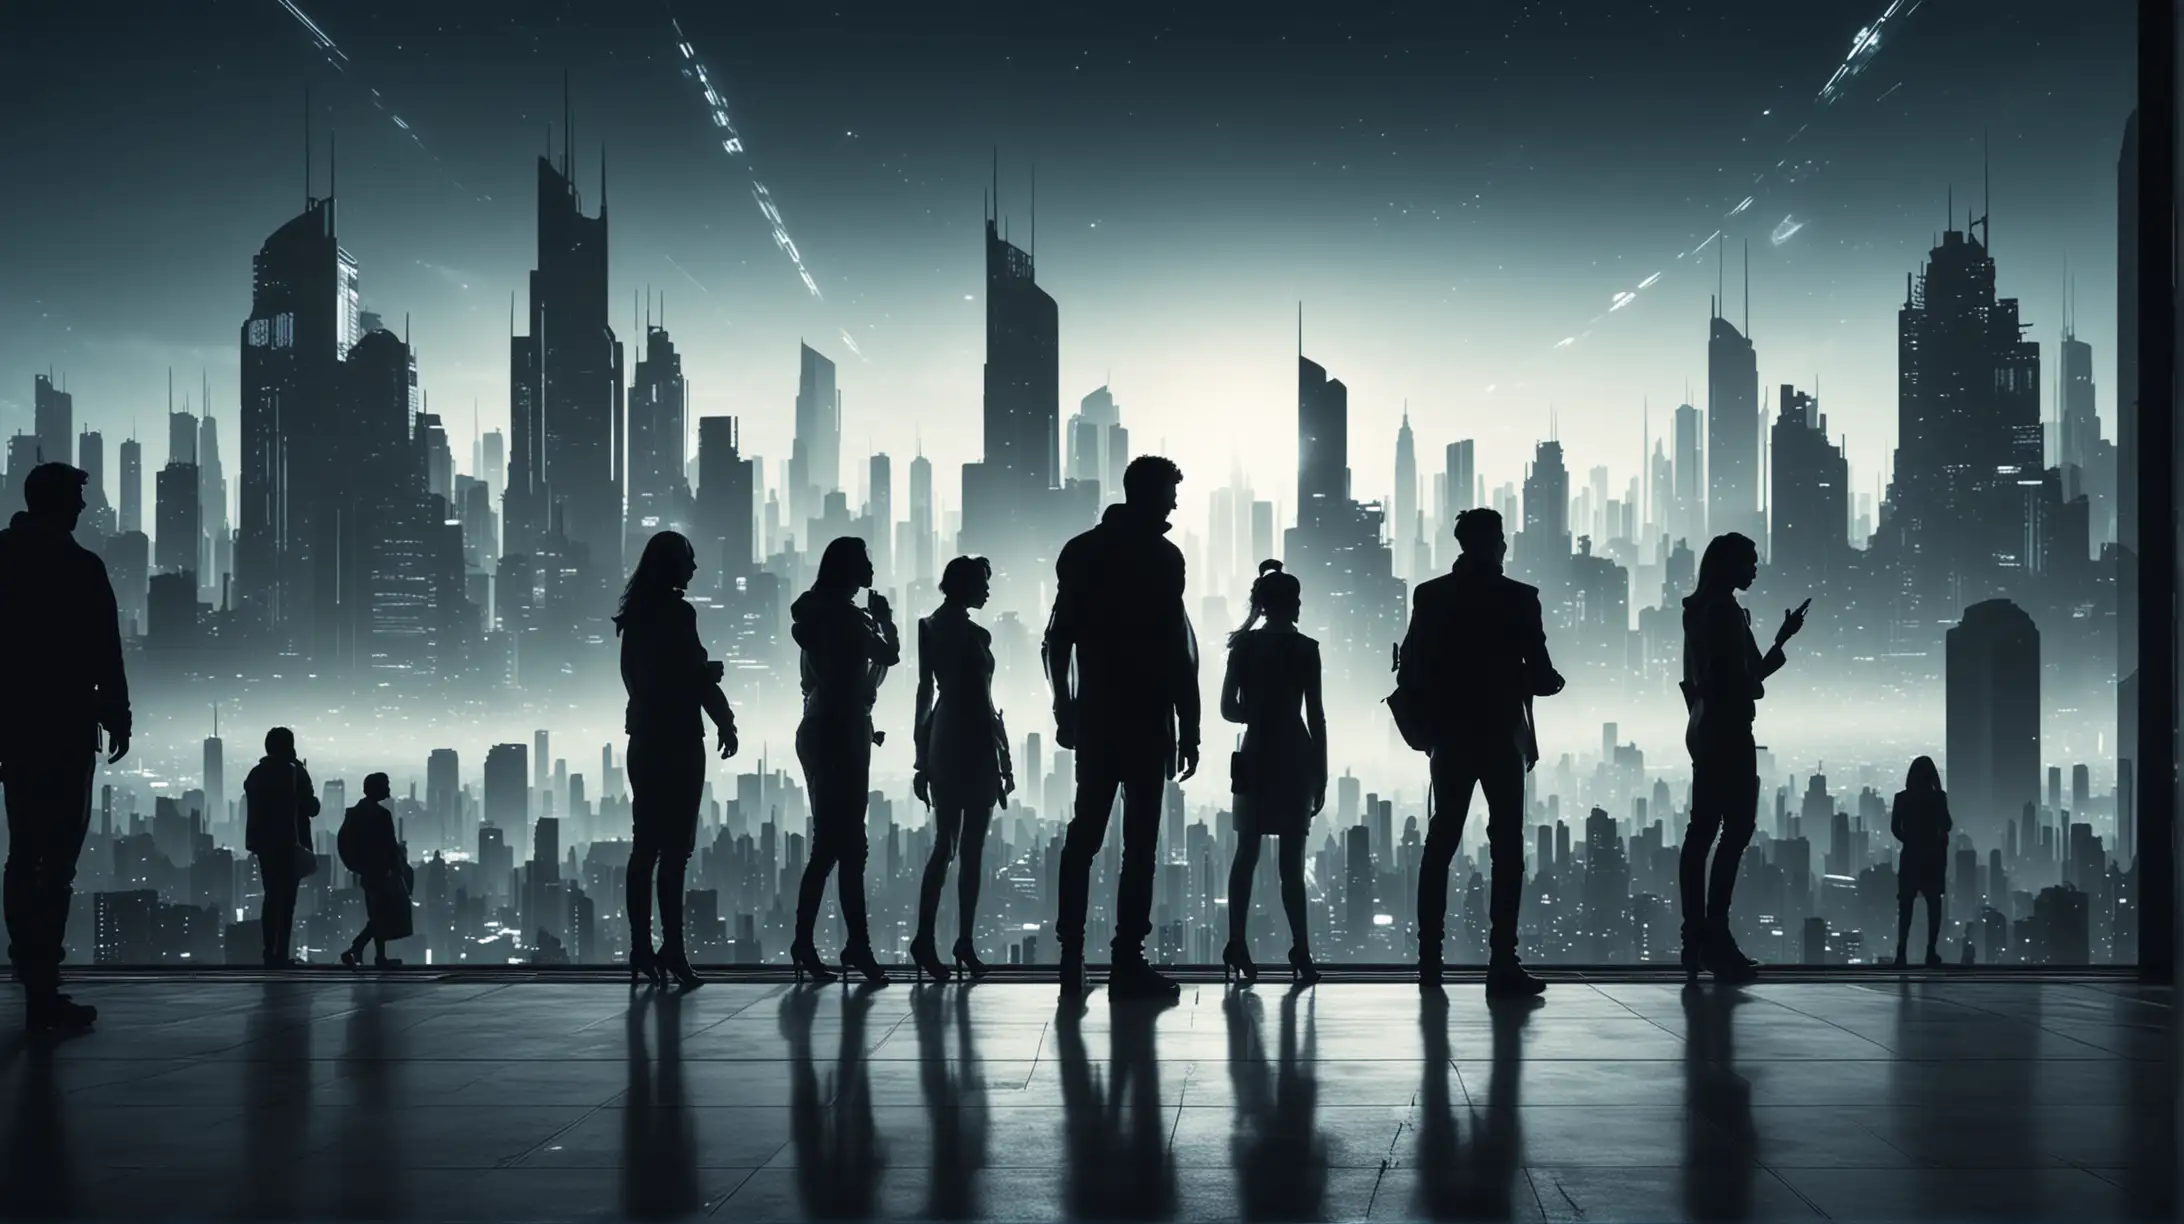 Futuristic City Silhouette Diverse Group Admires Technological Marvels